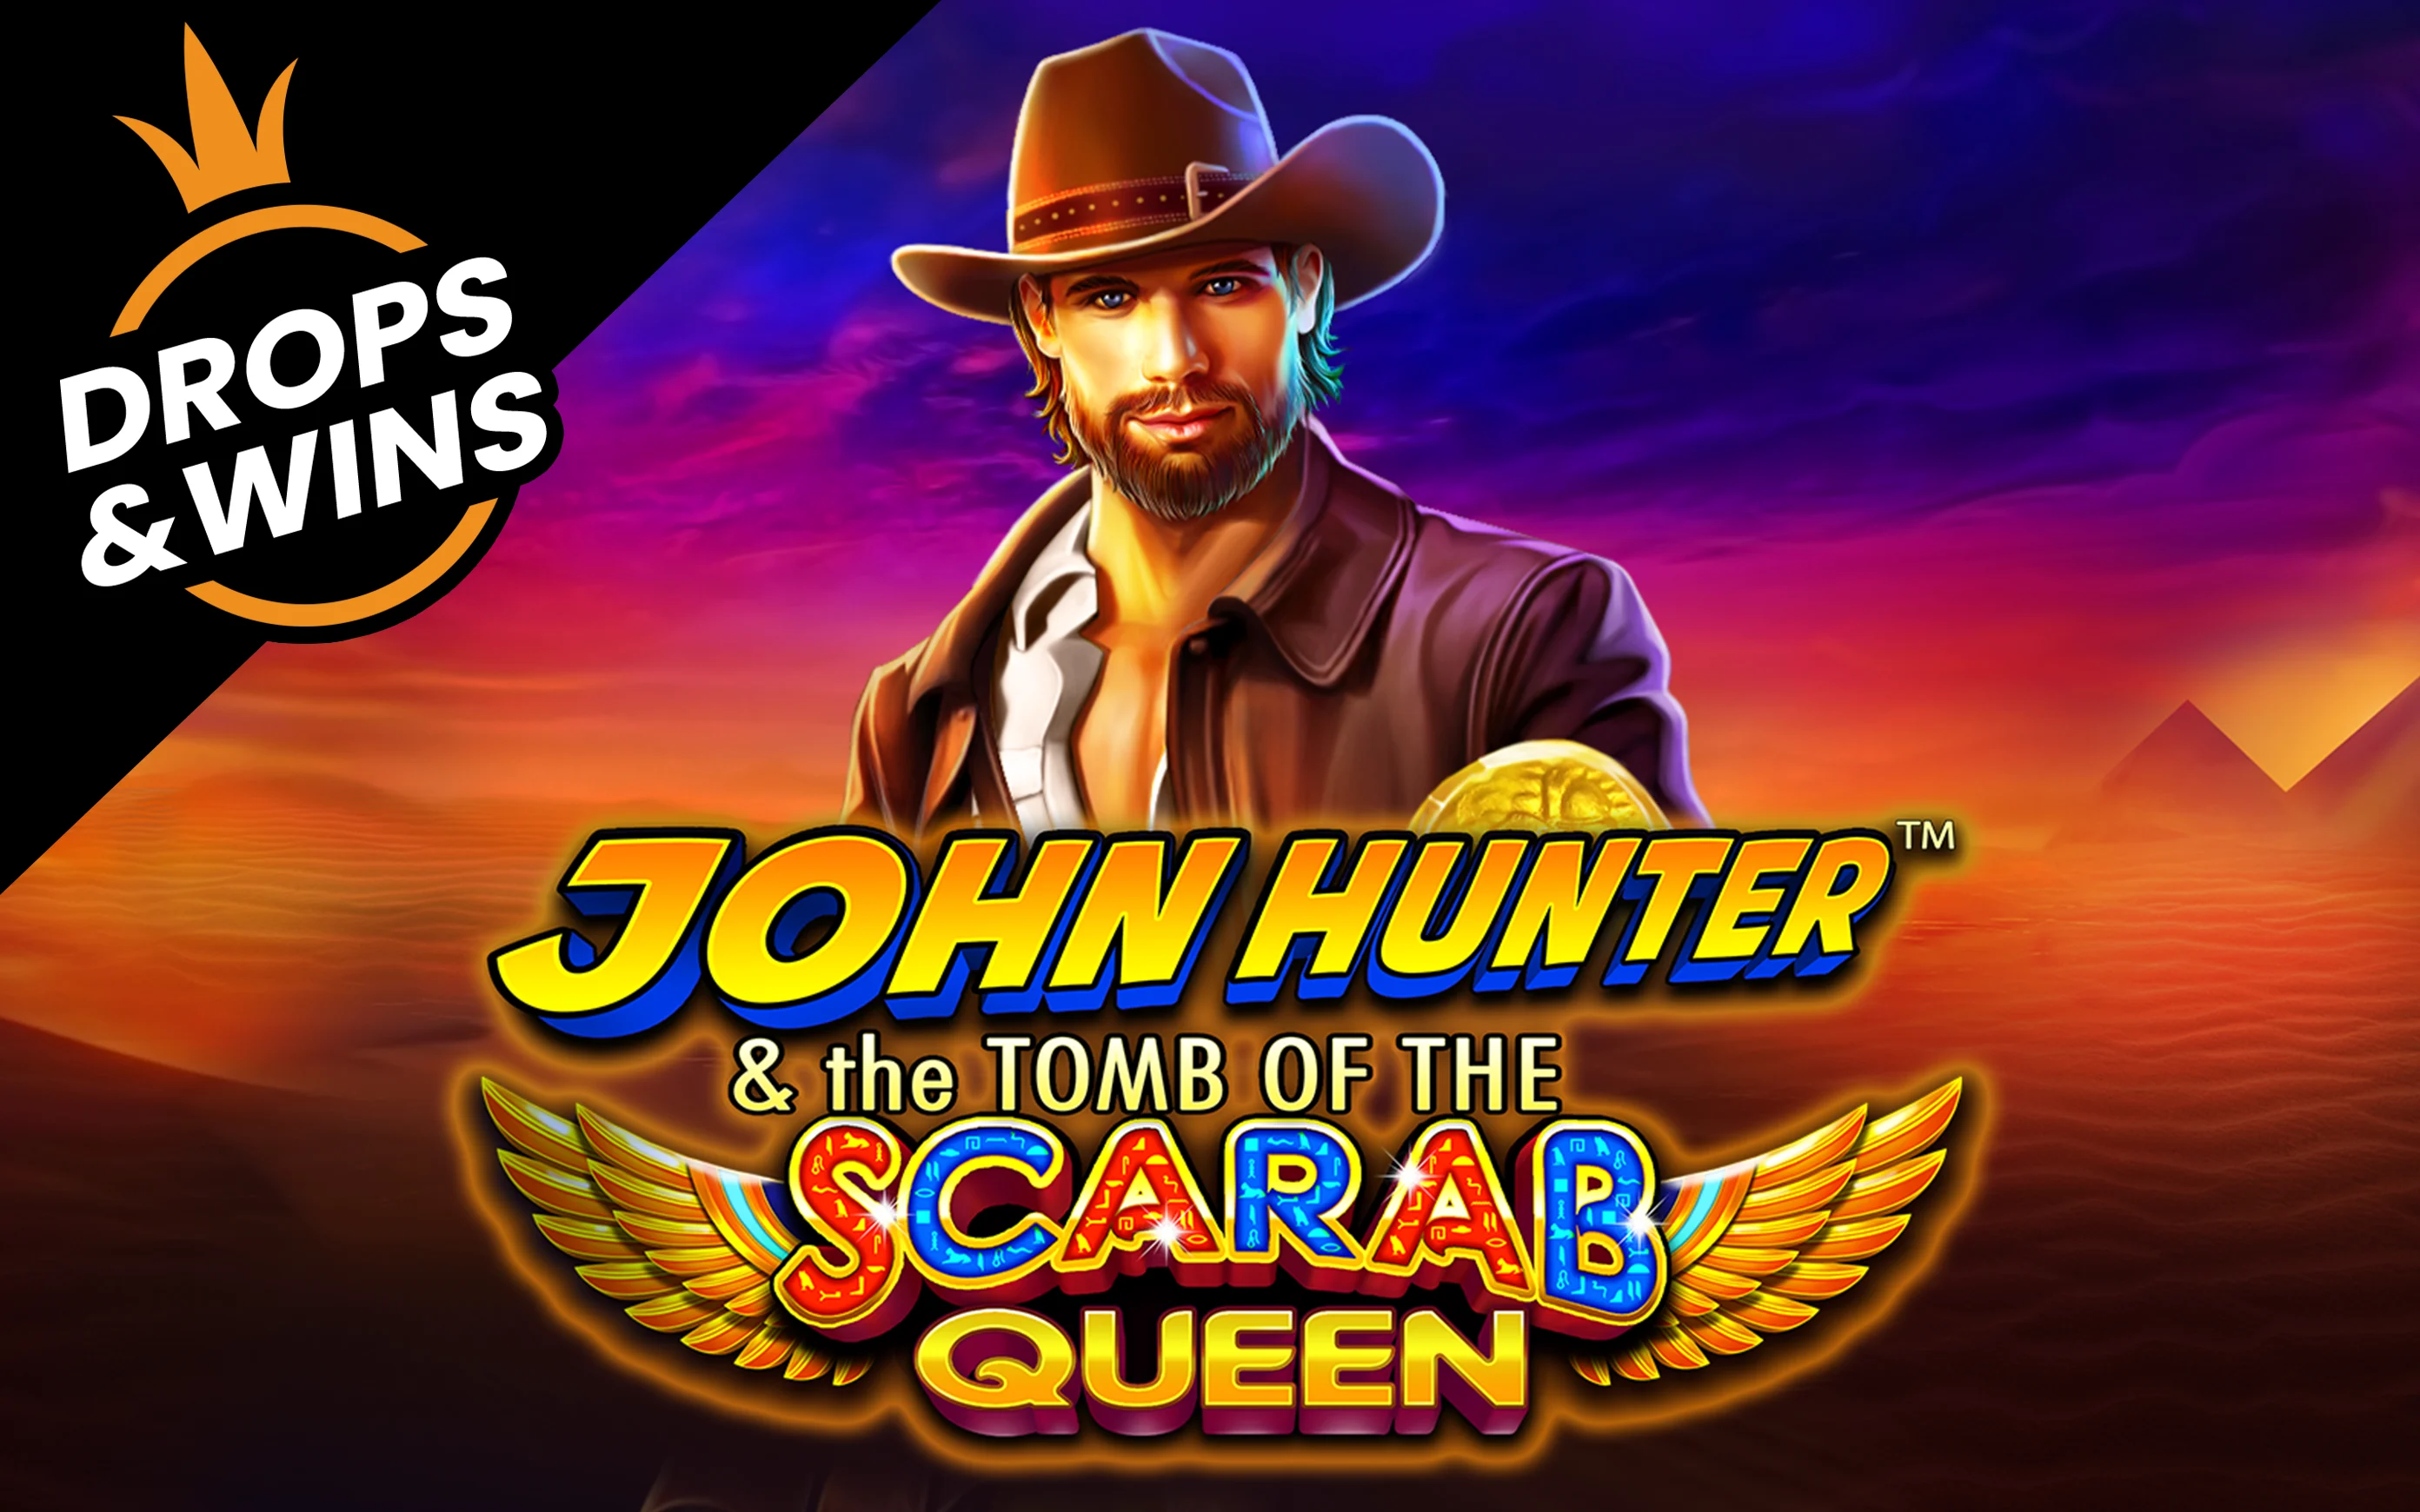 Play John Hunter and the Tomb of the Scarab Queen™ on Starcasino.be online casino